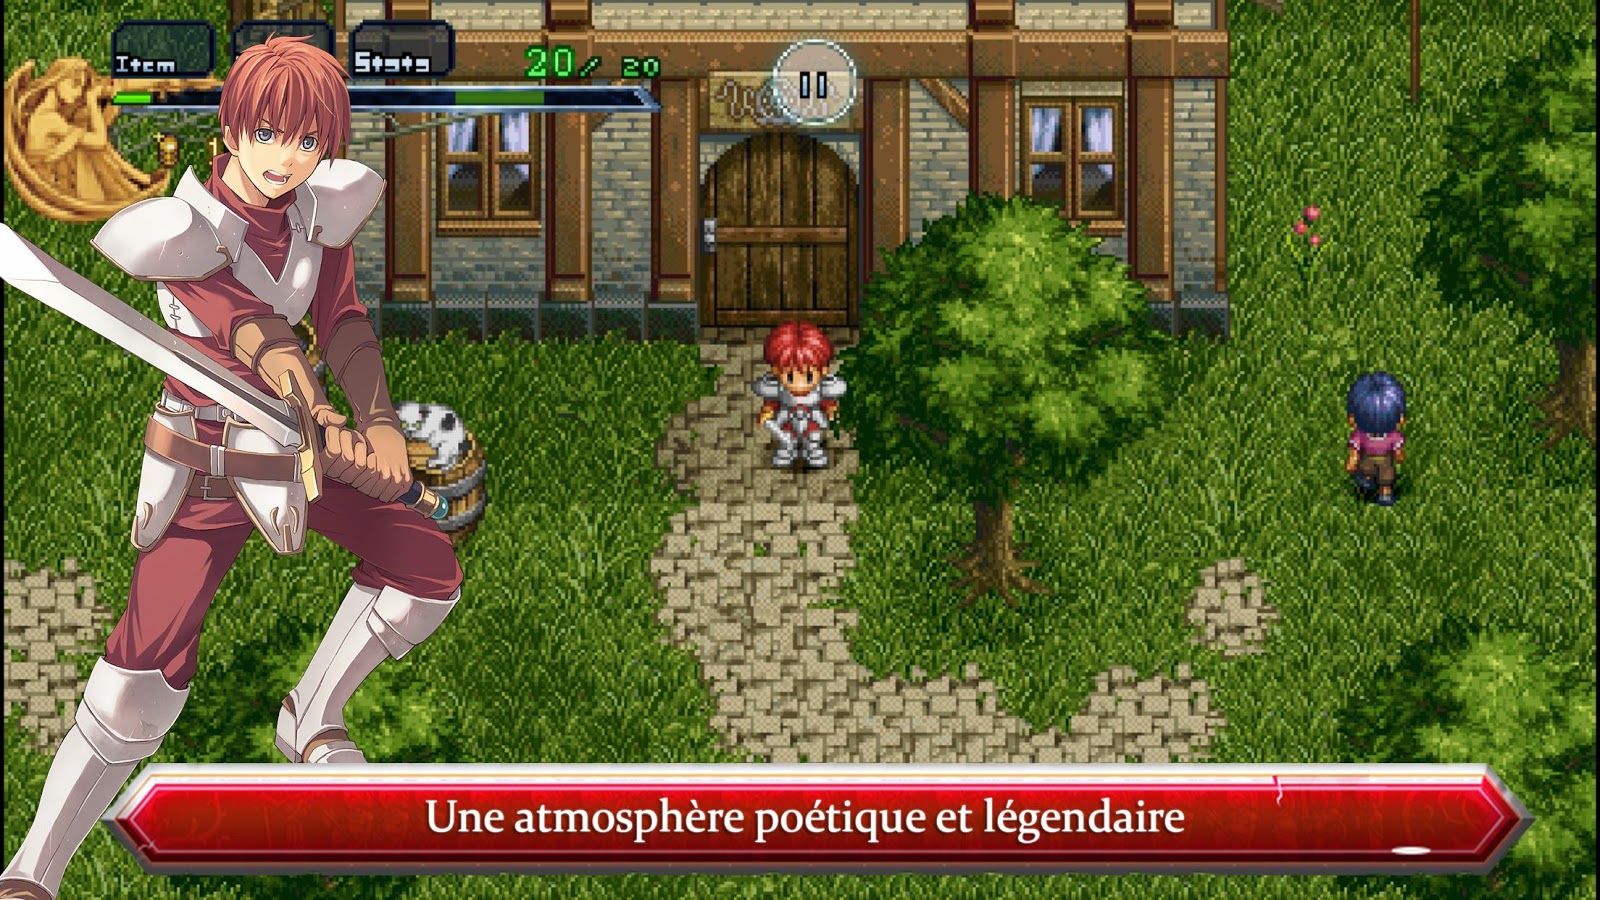 Ys Chronicles 1, DotEmu porte Ys Chronicles 1 sur Android